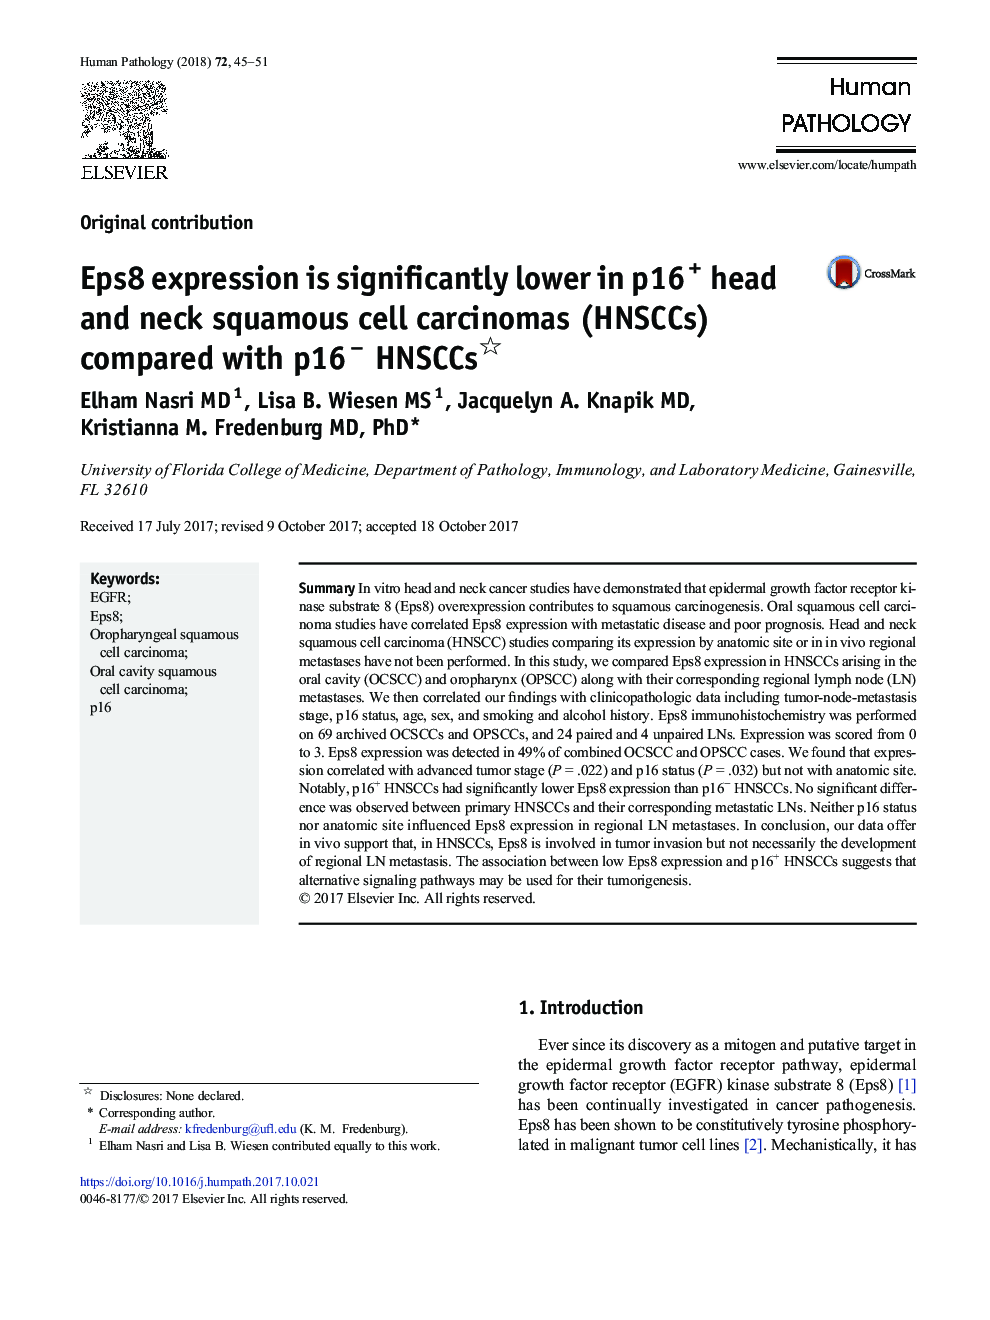 Eps8 expression is significantly lower in p16+ head and neck squamous cell carcinomas (HNSCCs) compared with p16â HNSCCs